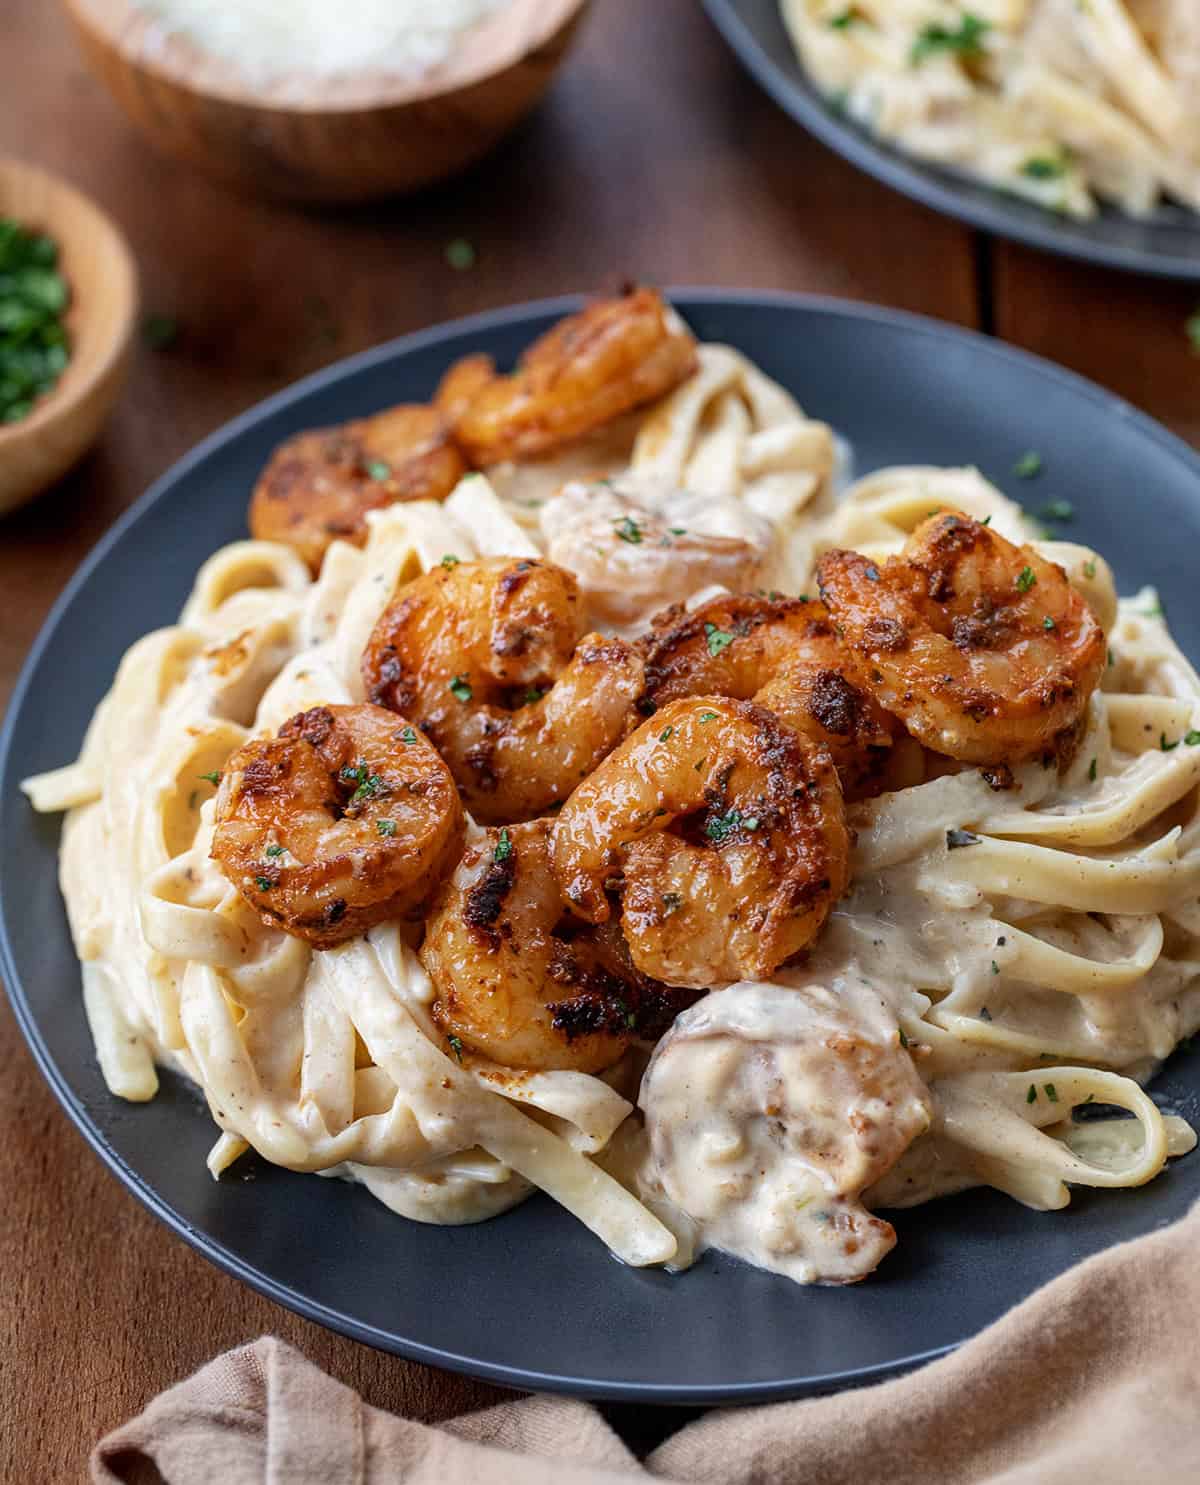 Plate of Shrimp Alfredo on a wooden table.